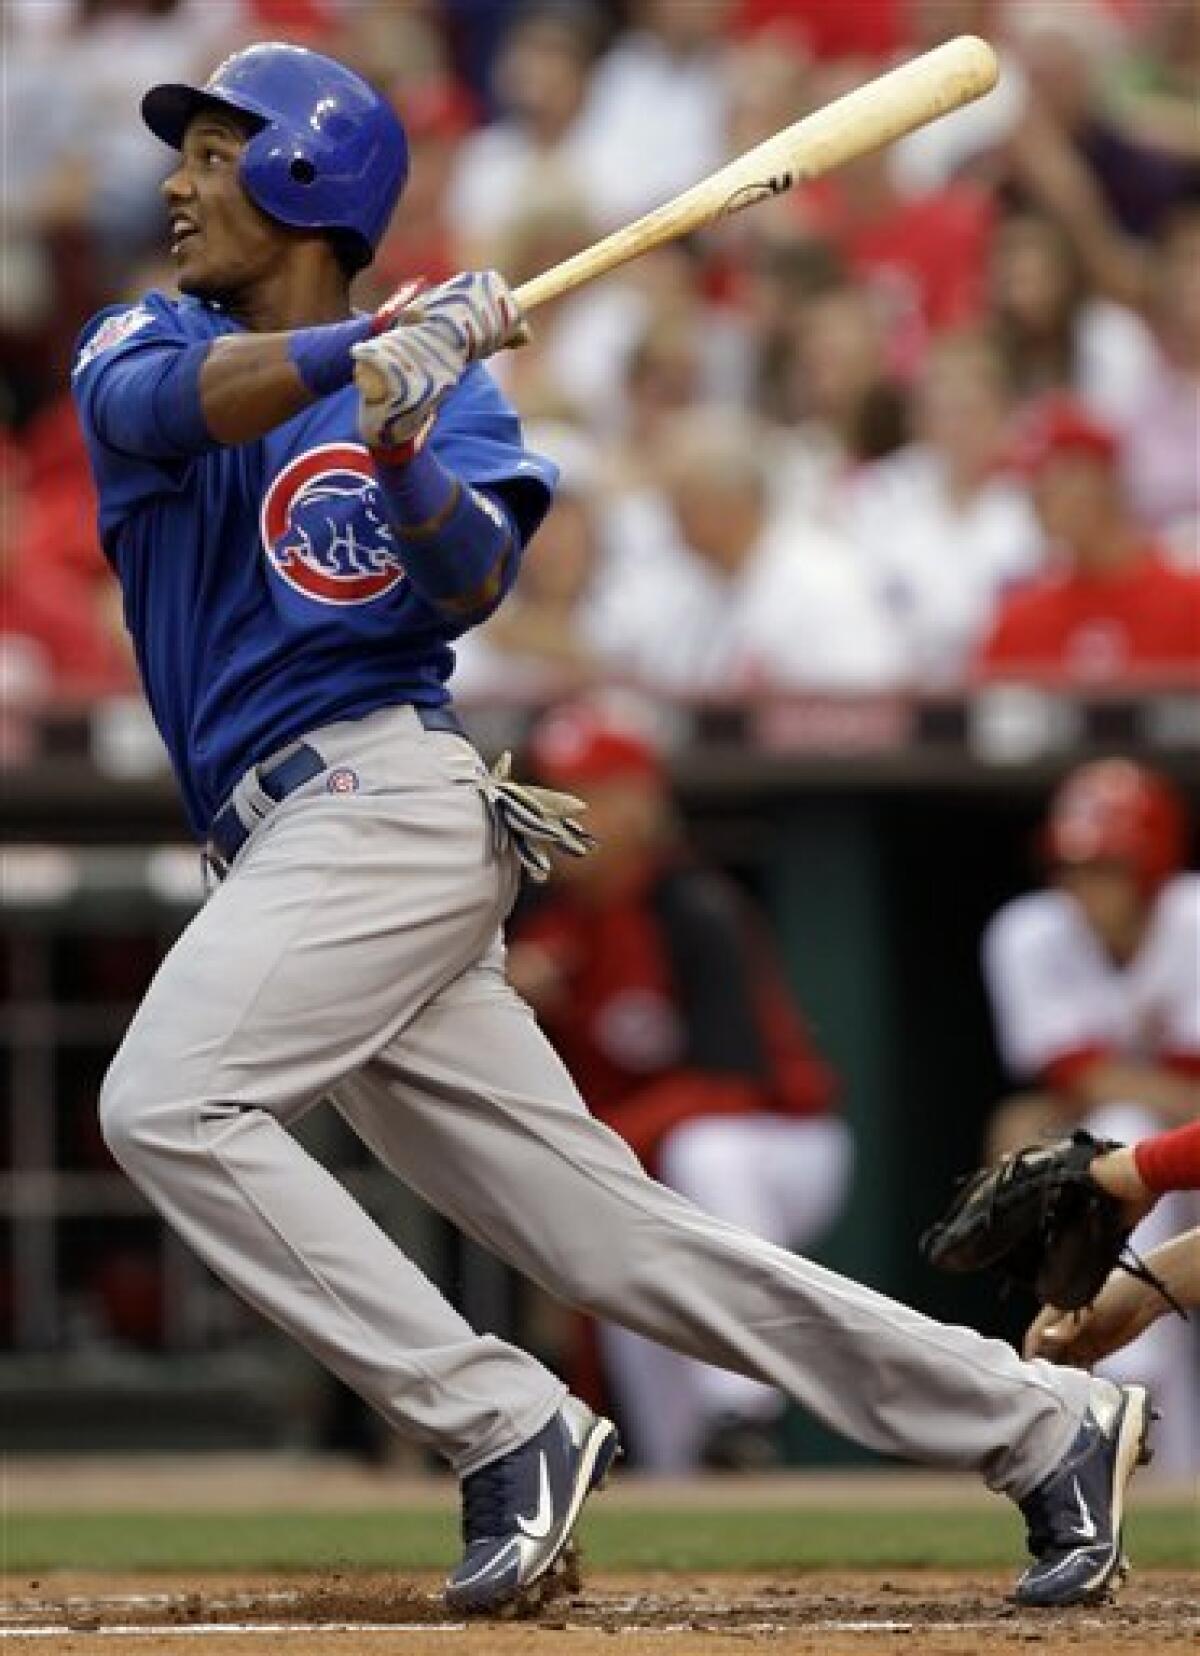 Cubs call up top prospect SS Starlin Castro - The San Diego Union